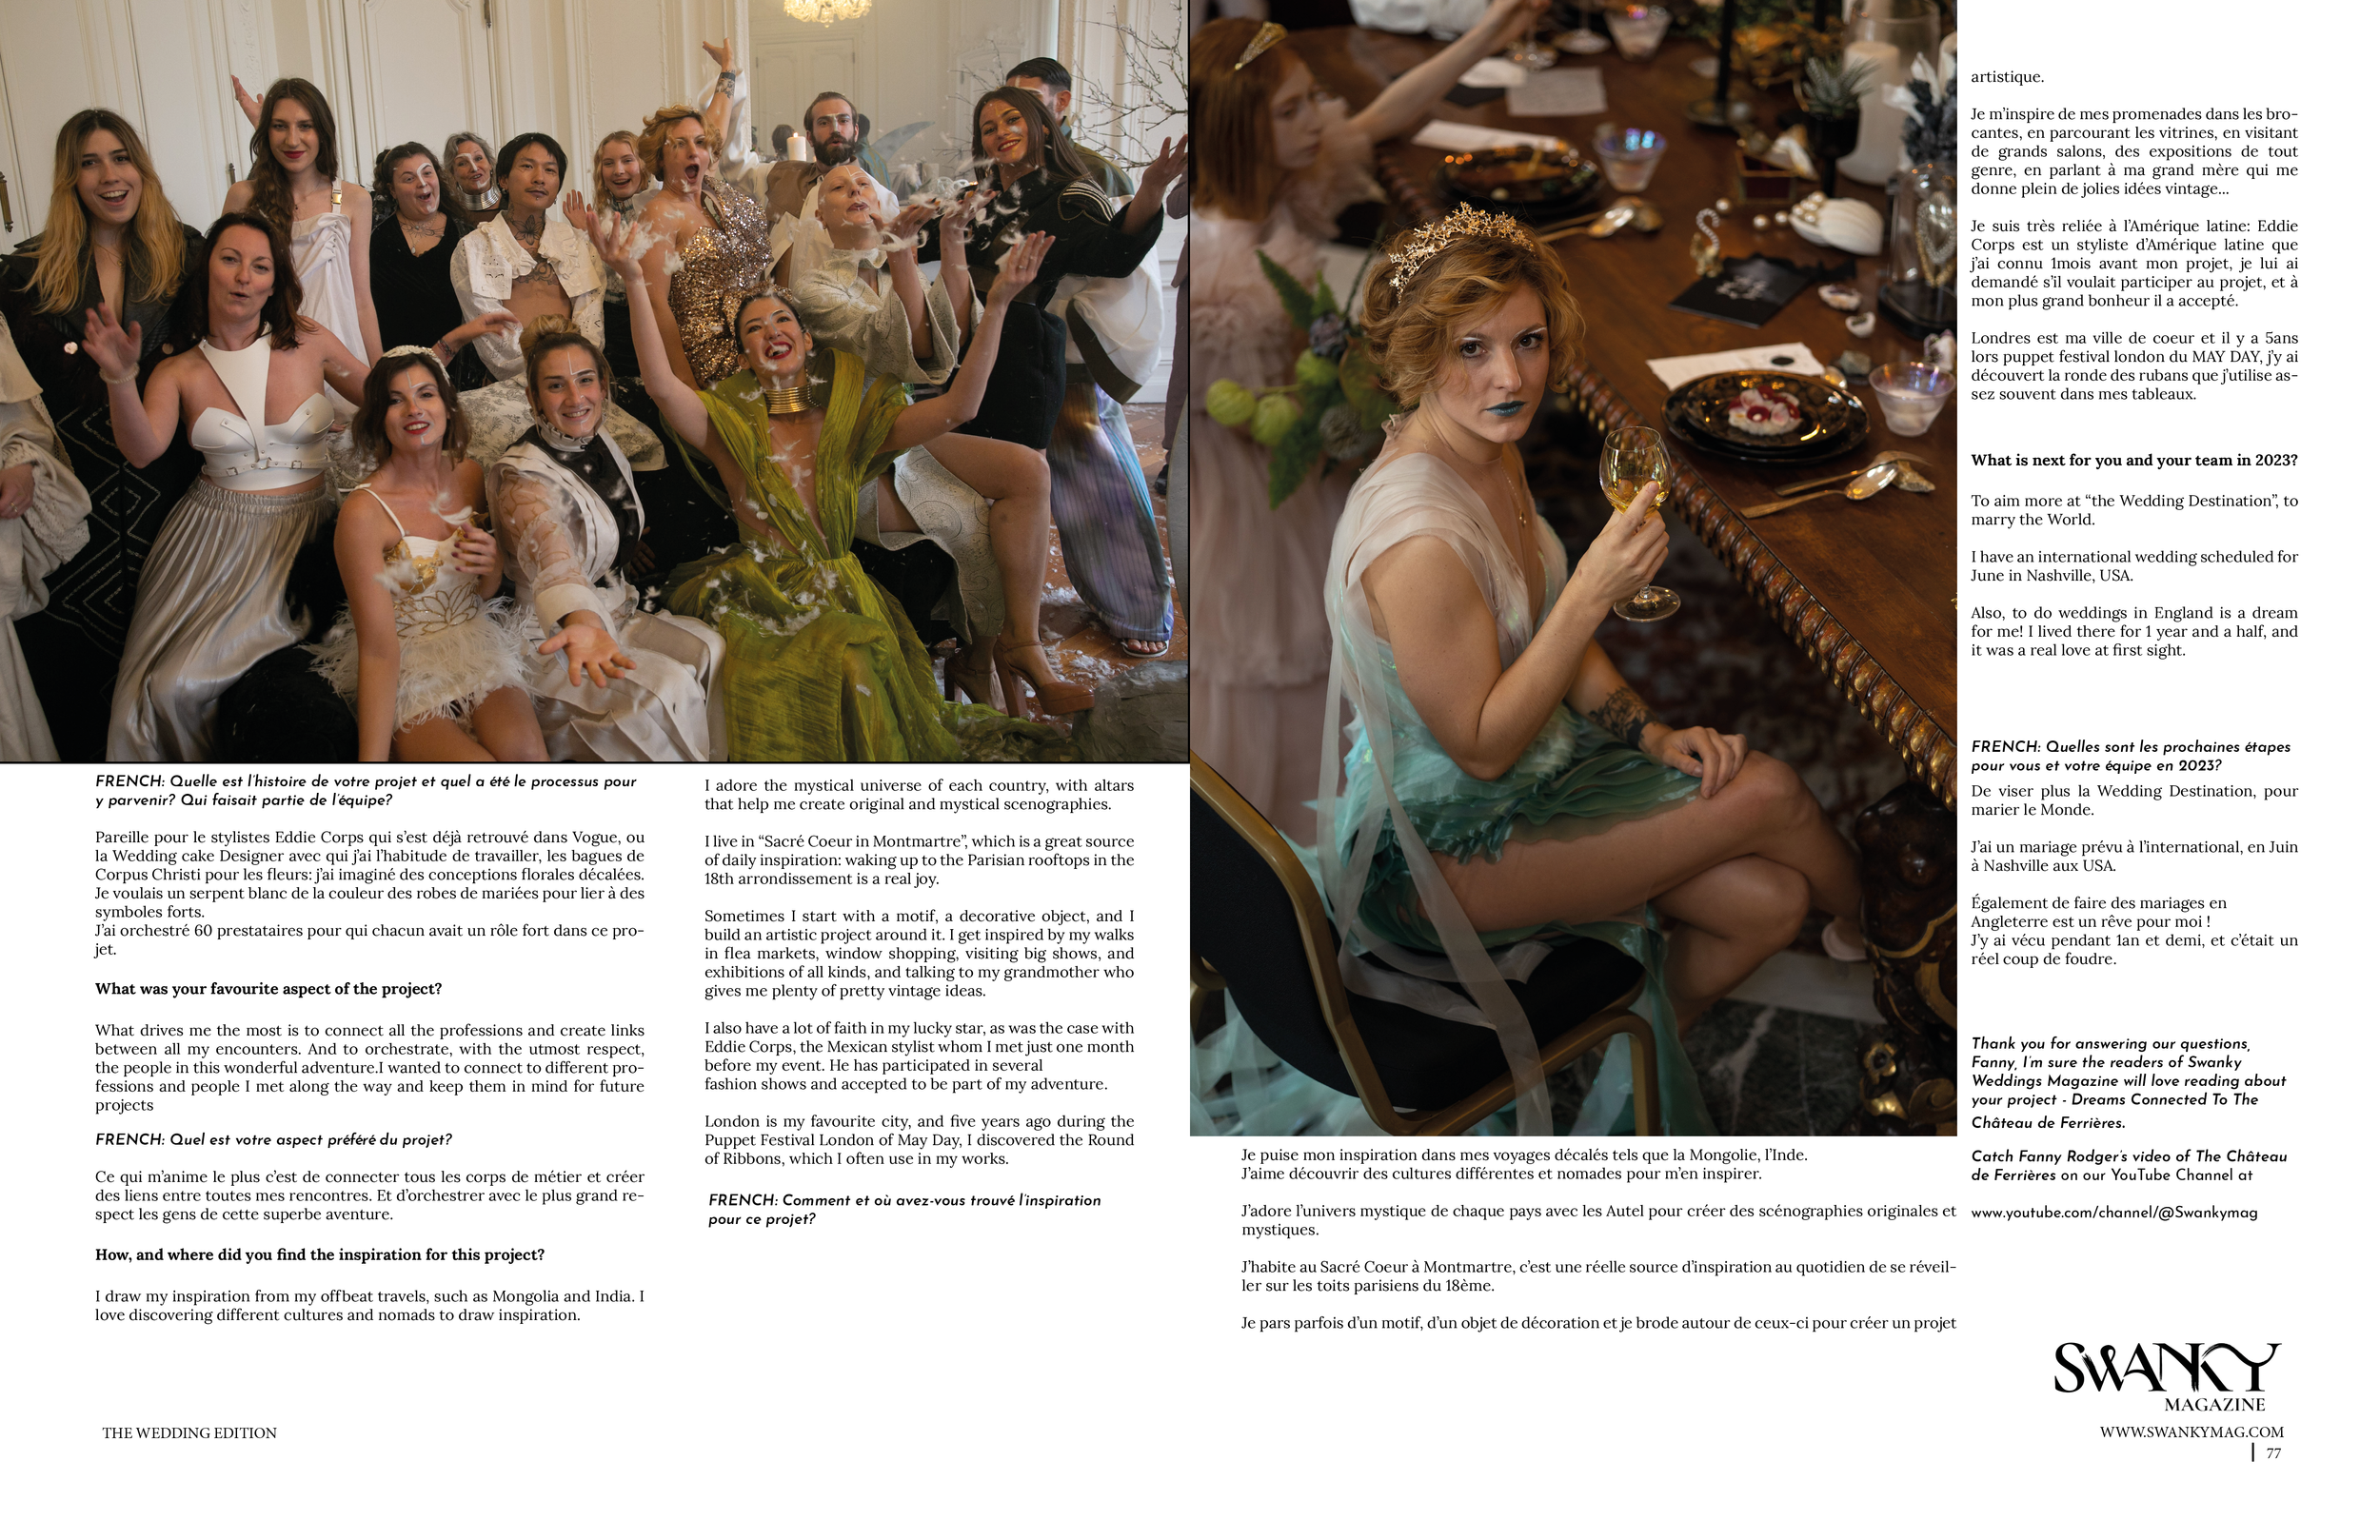 Swanky Mag Wedding Edition April 2023 issue 54 - Copy.png